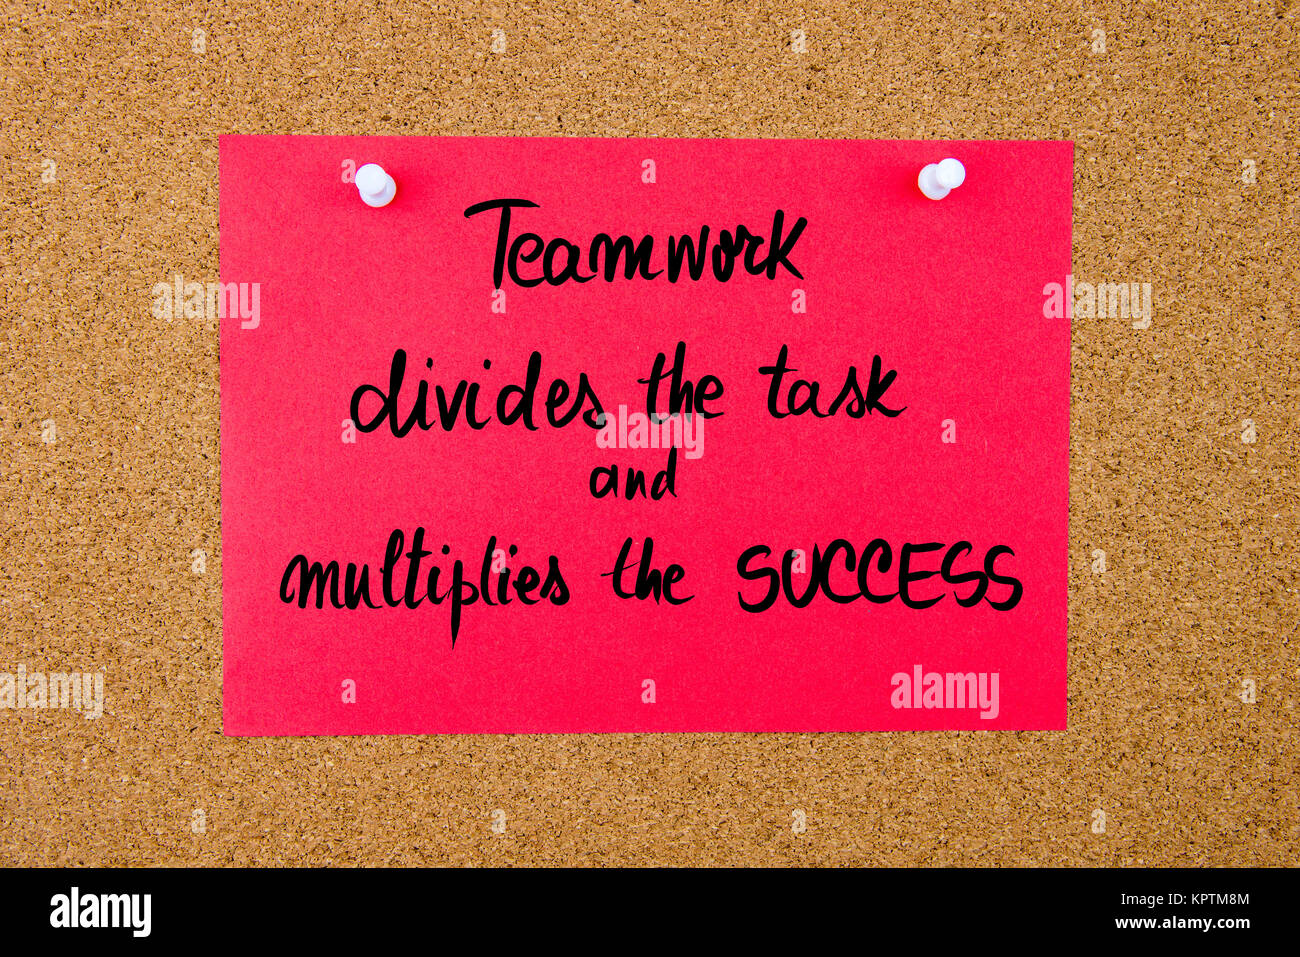 teamwork divides the task and multiplies the success football